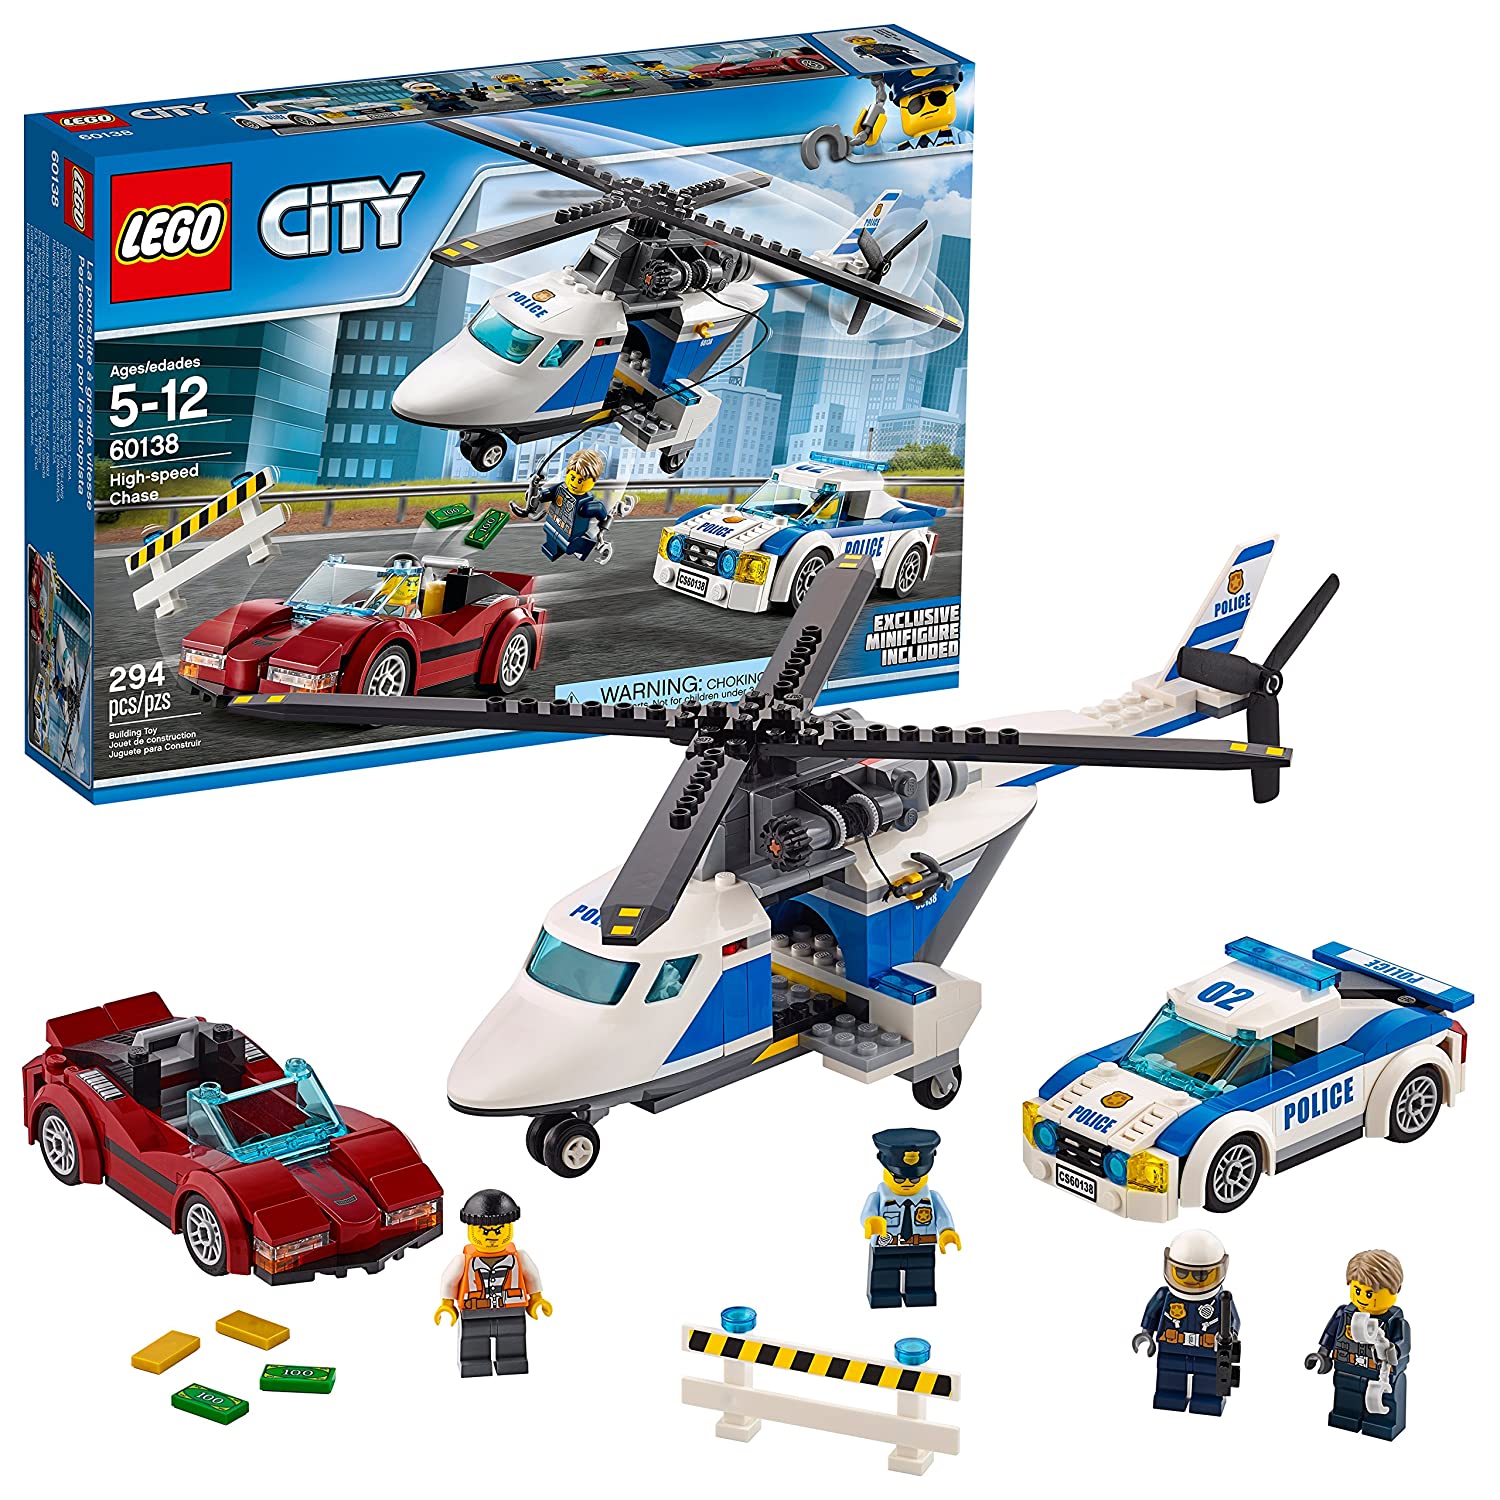 9 Best LEGO Police Station Set 2022 - Buying Guide & Reviews 4